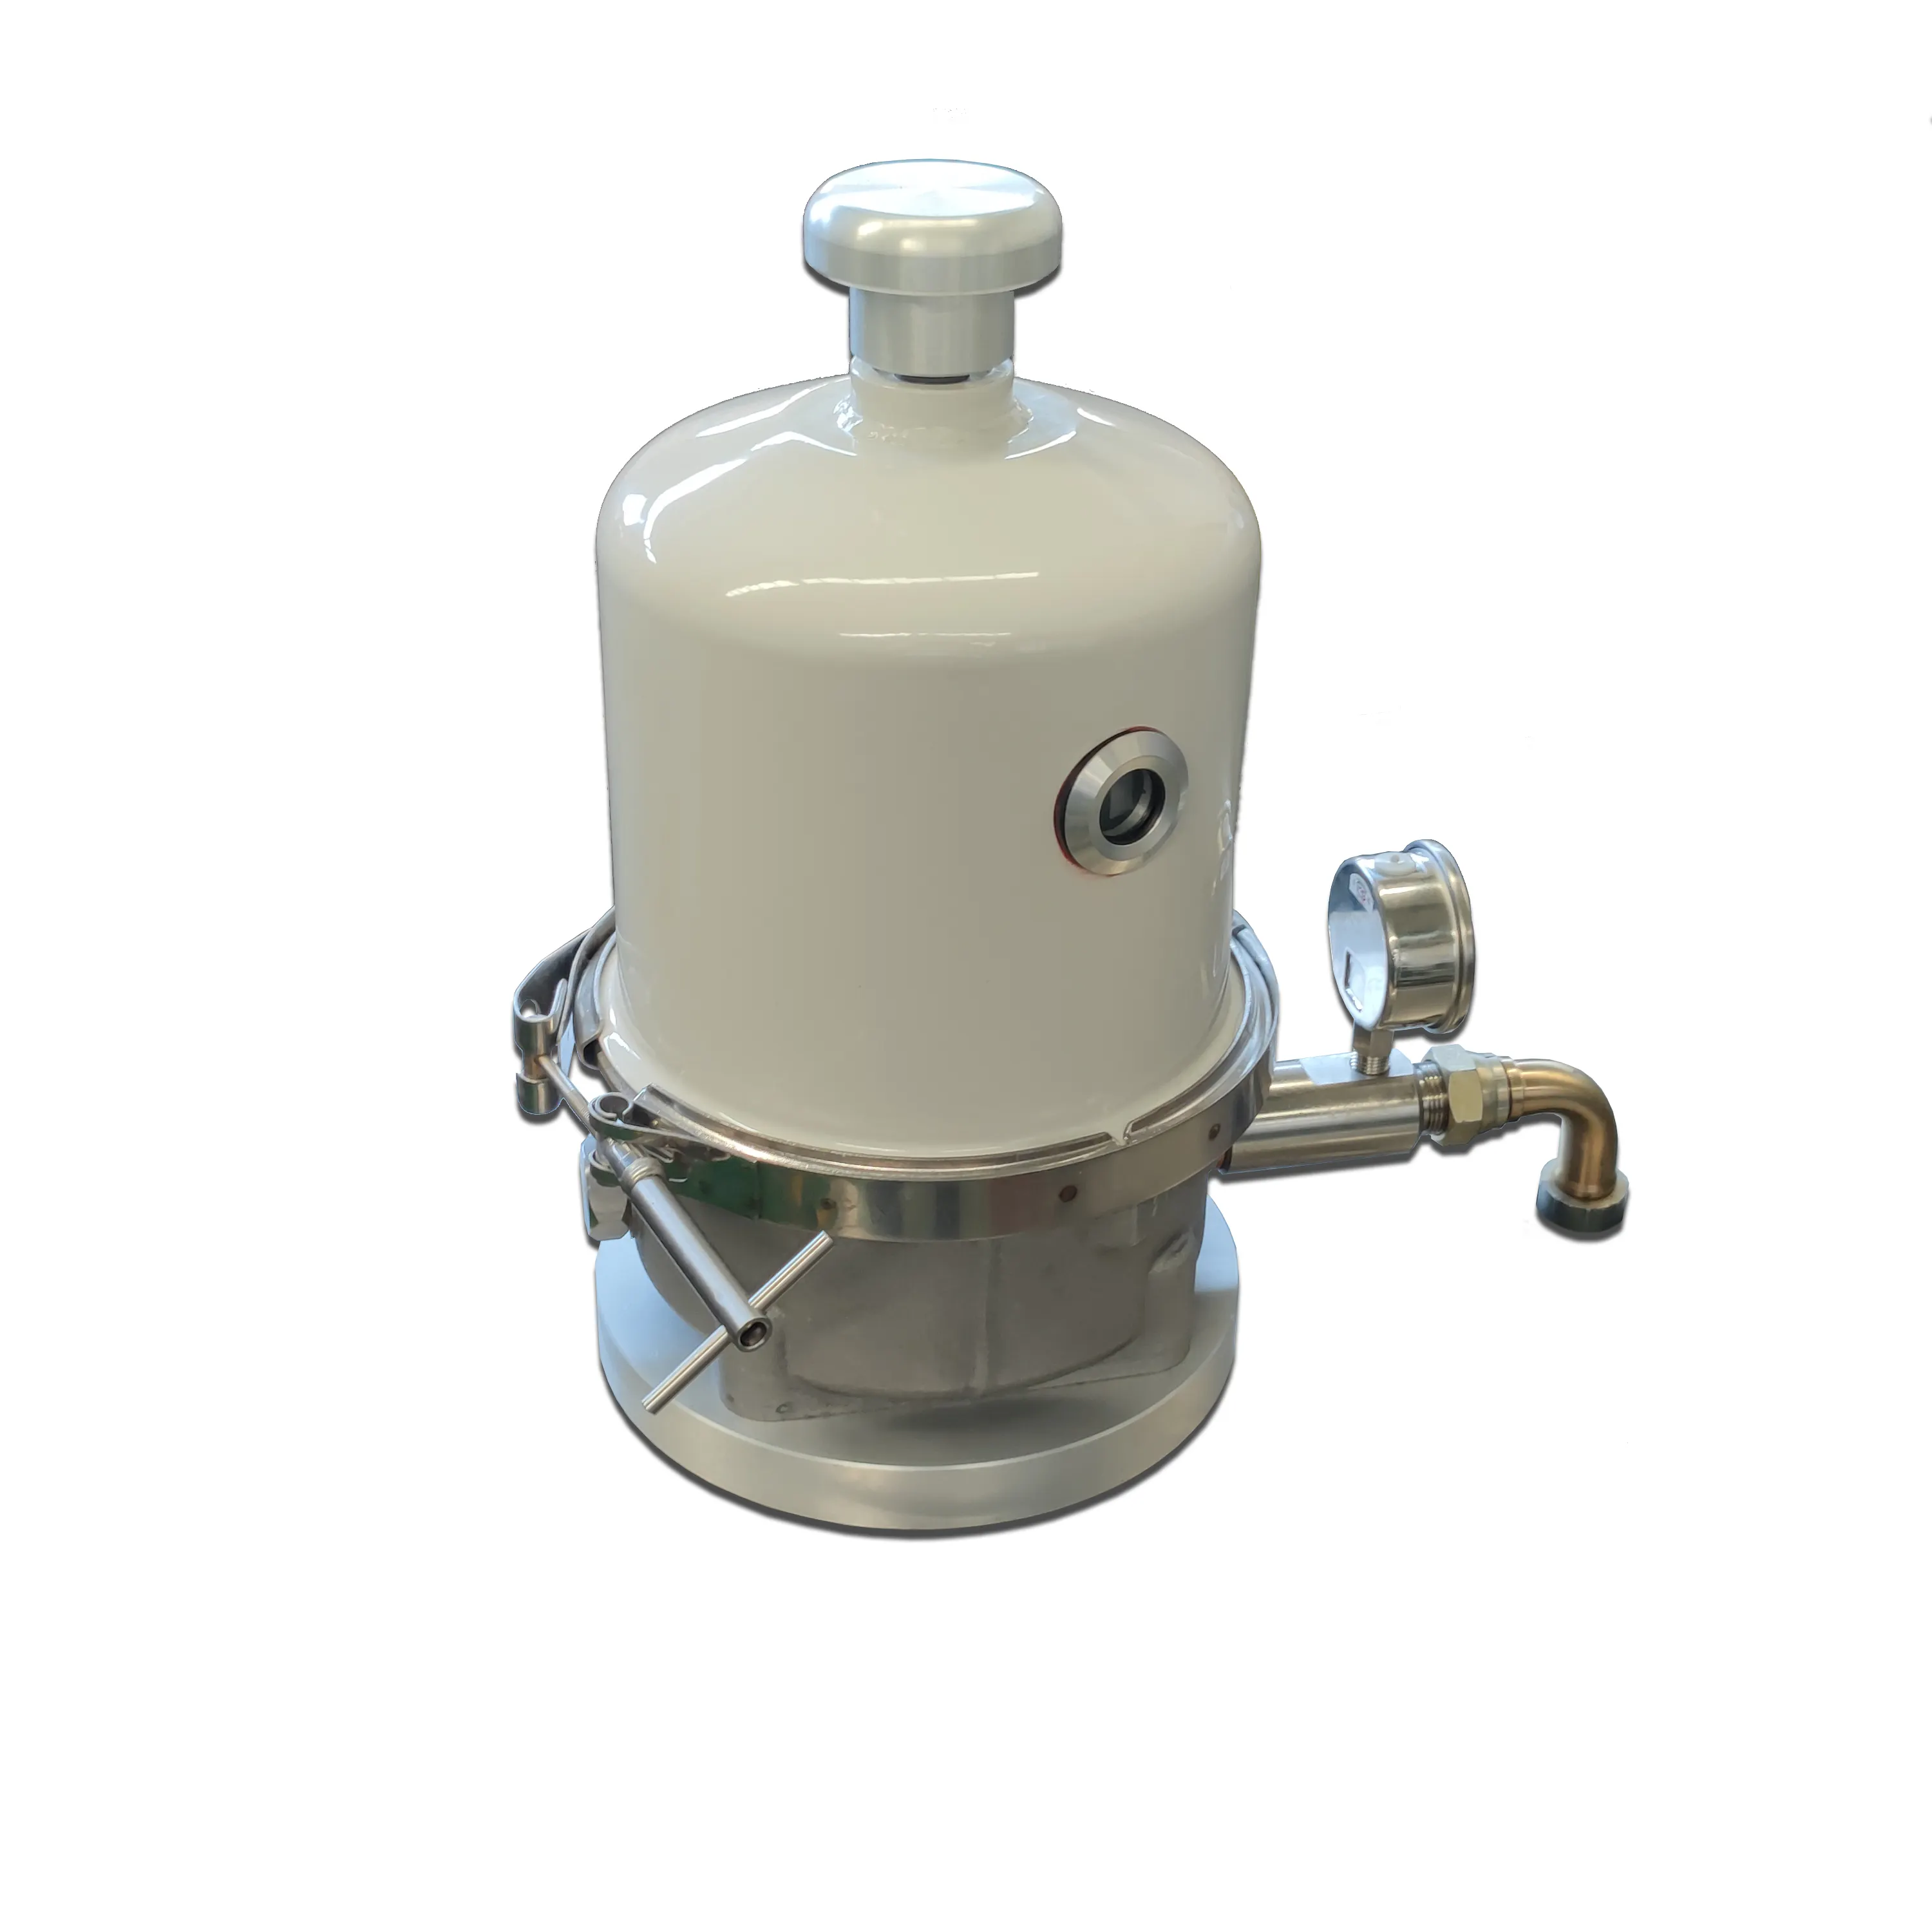 Oil filtration system for the rolling oil